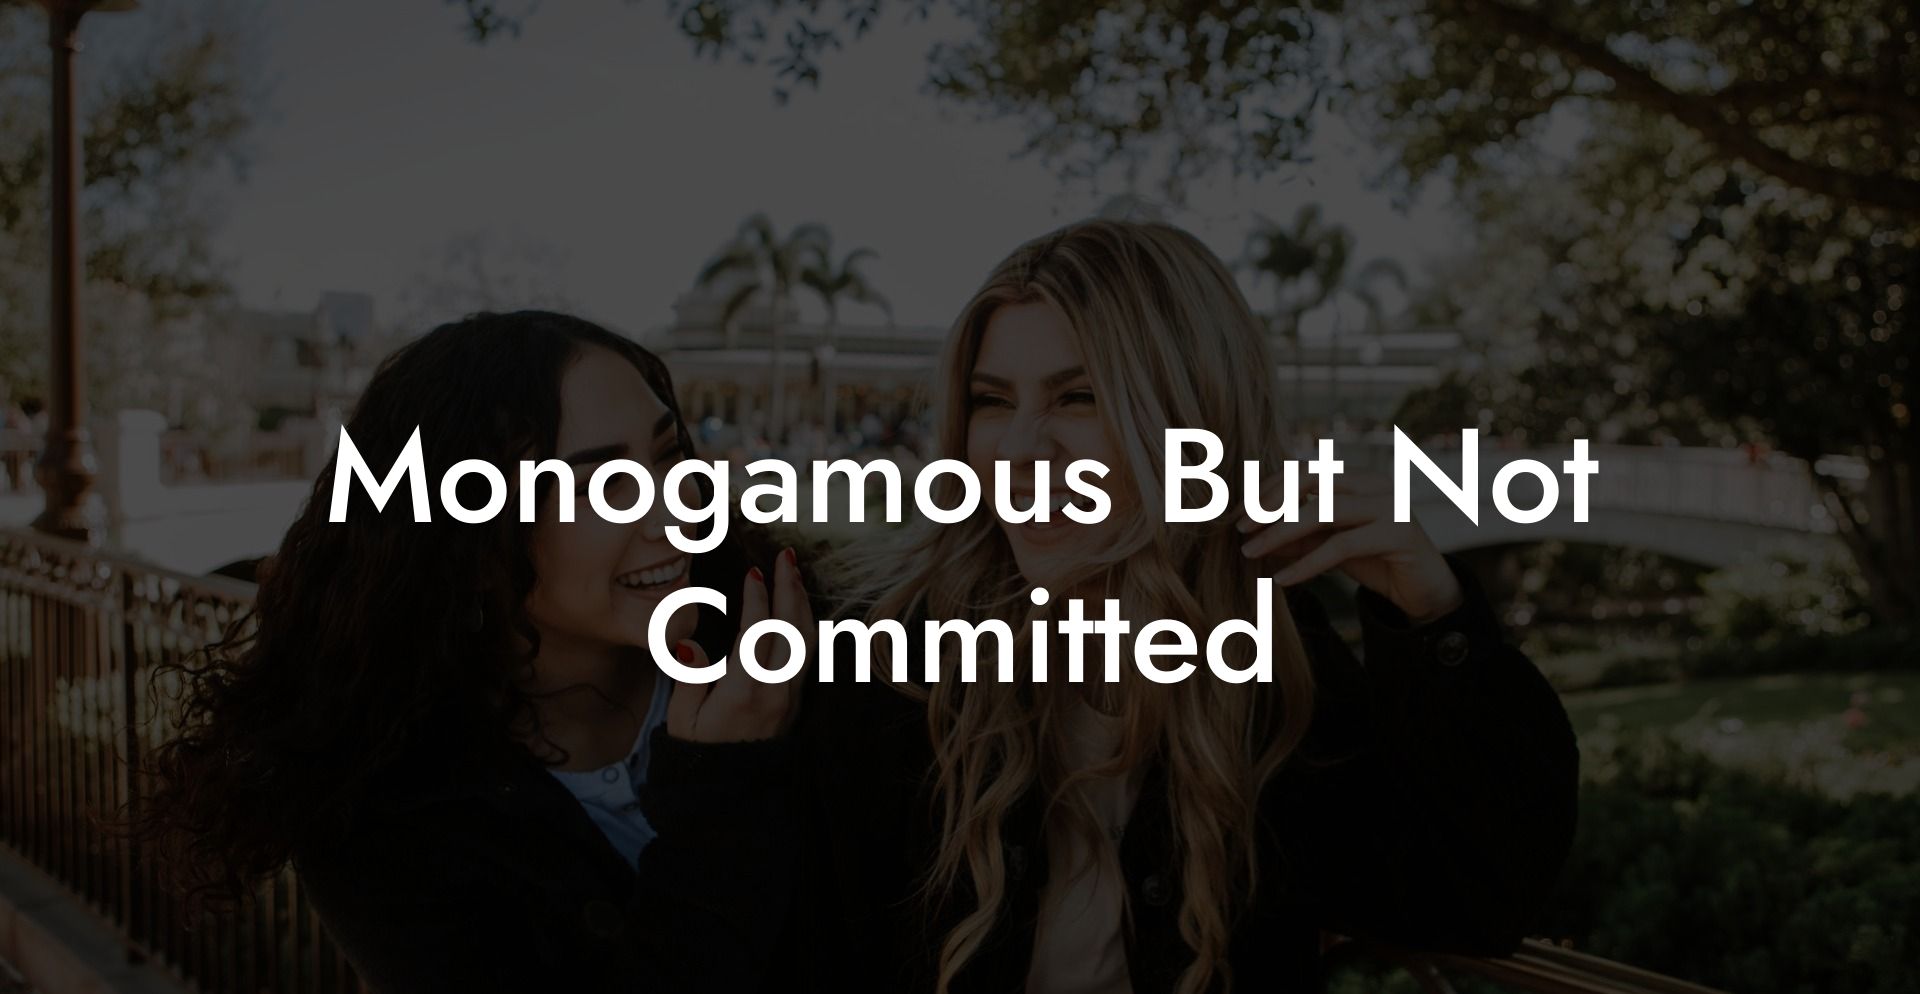 Monogamous But Not Committed